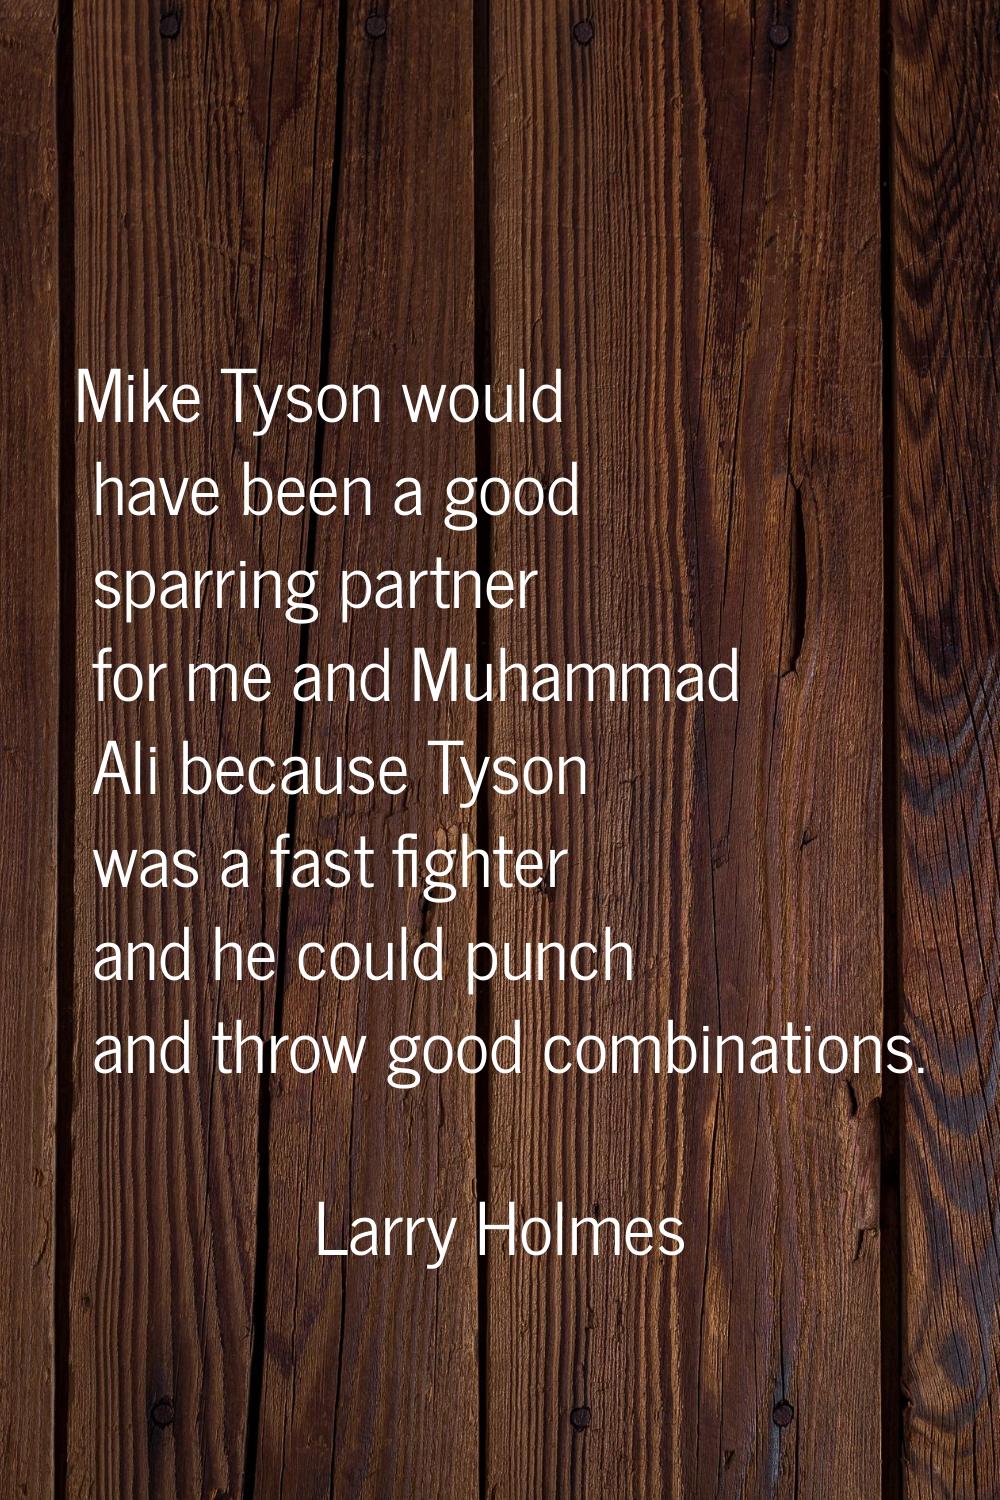 Mike Tyson would have been a good sparring partner for me and Muhammad Ali because Tyson was a fast